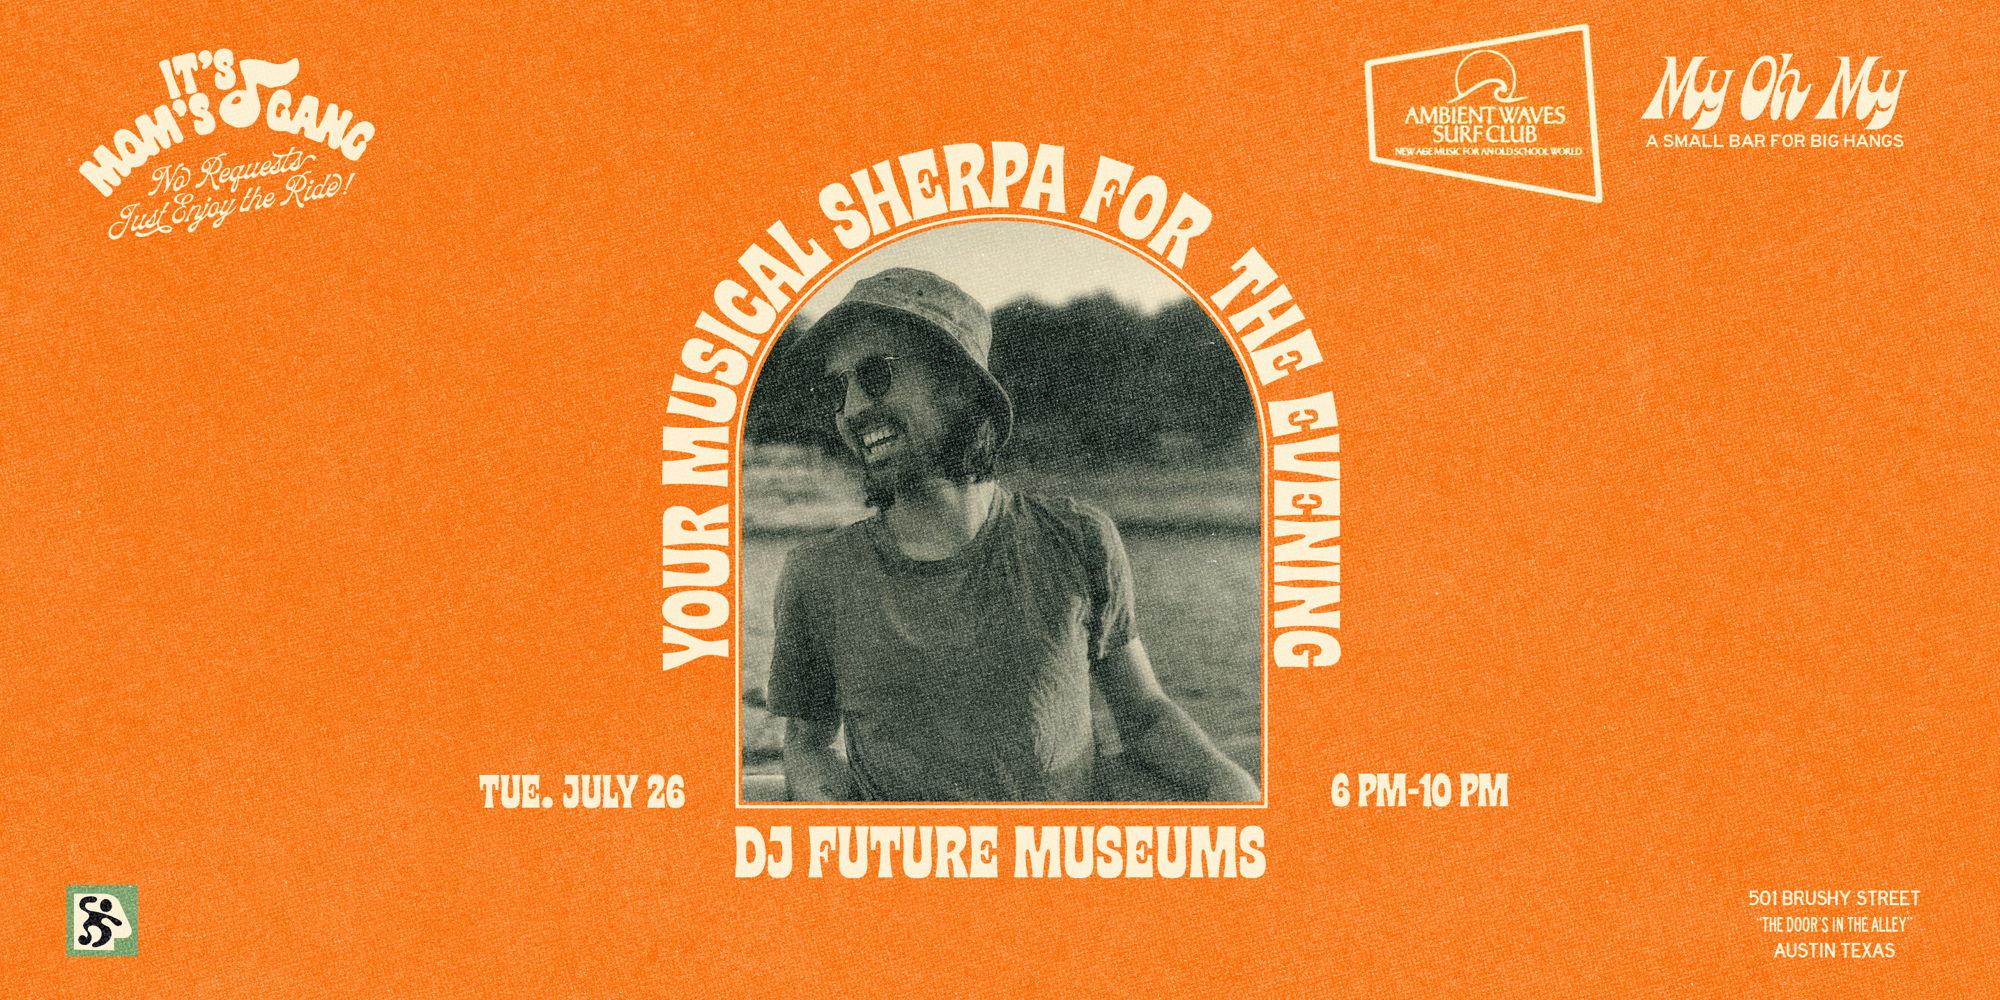 DJ Future Museums @ My Oh My on July 26th promotional image